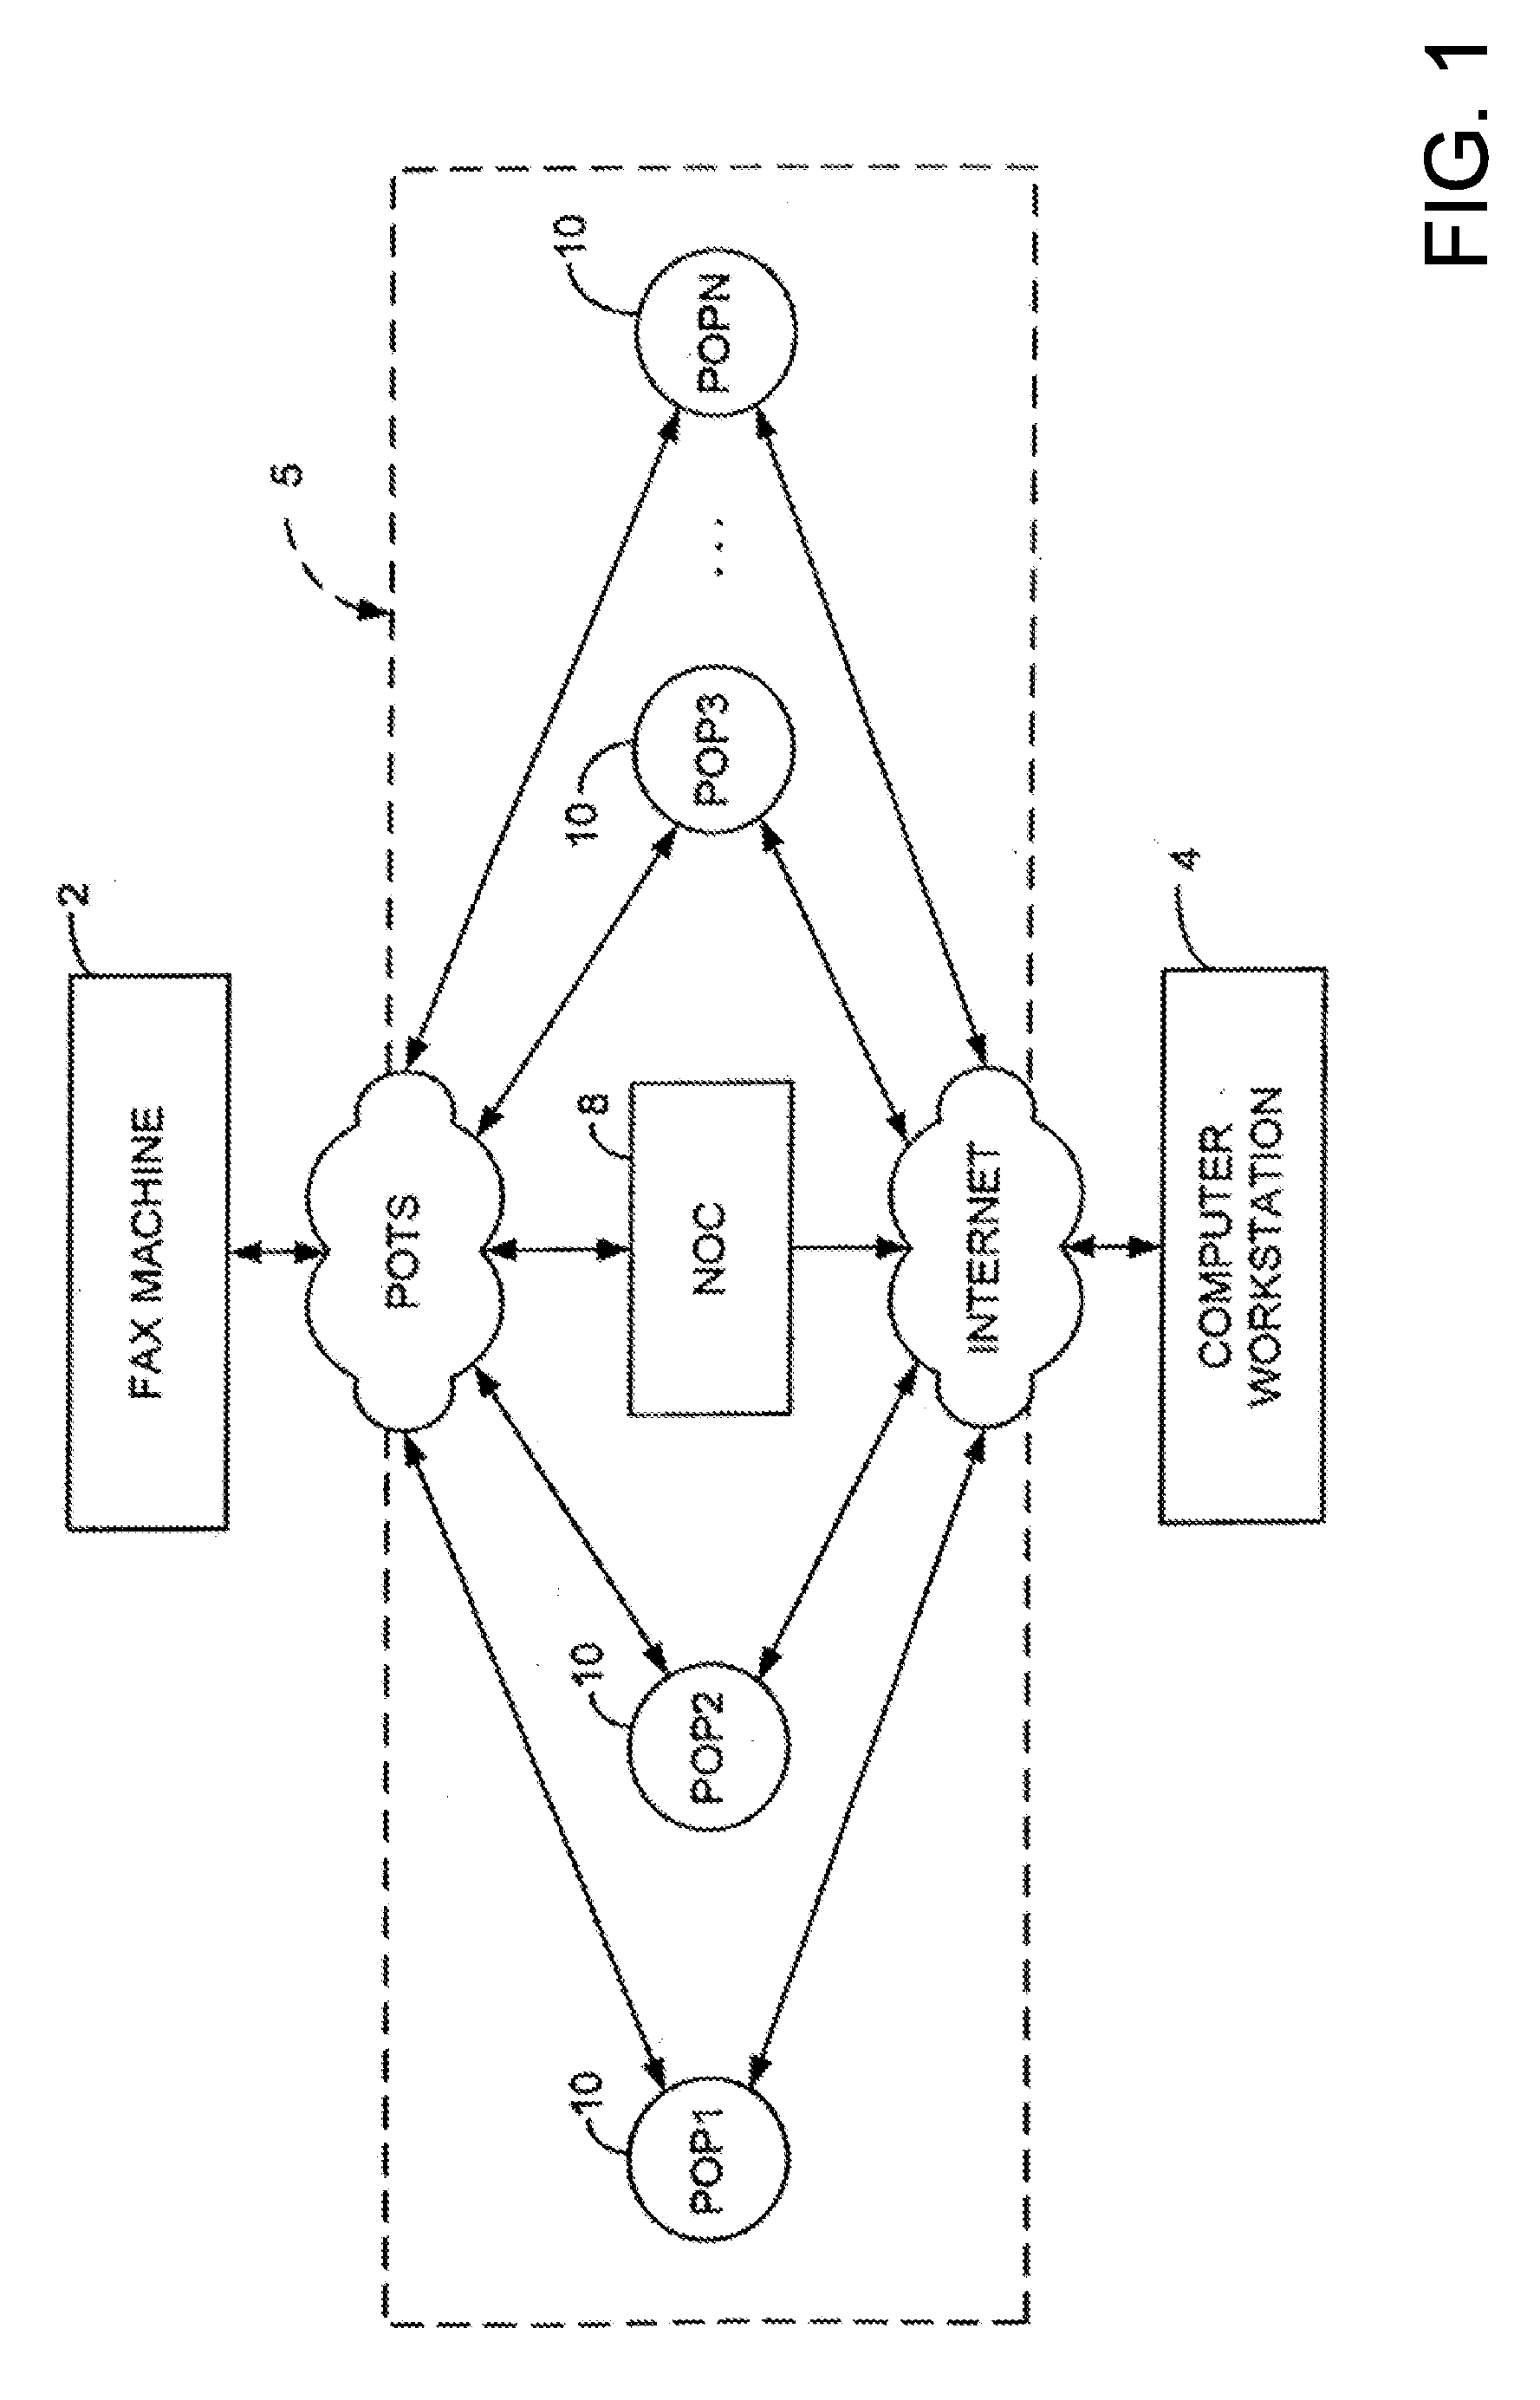 Methods and apparatus for billing of facsimile transmissions to electronic storage destinations